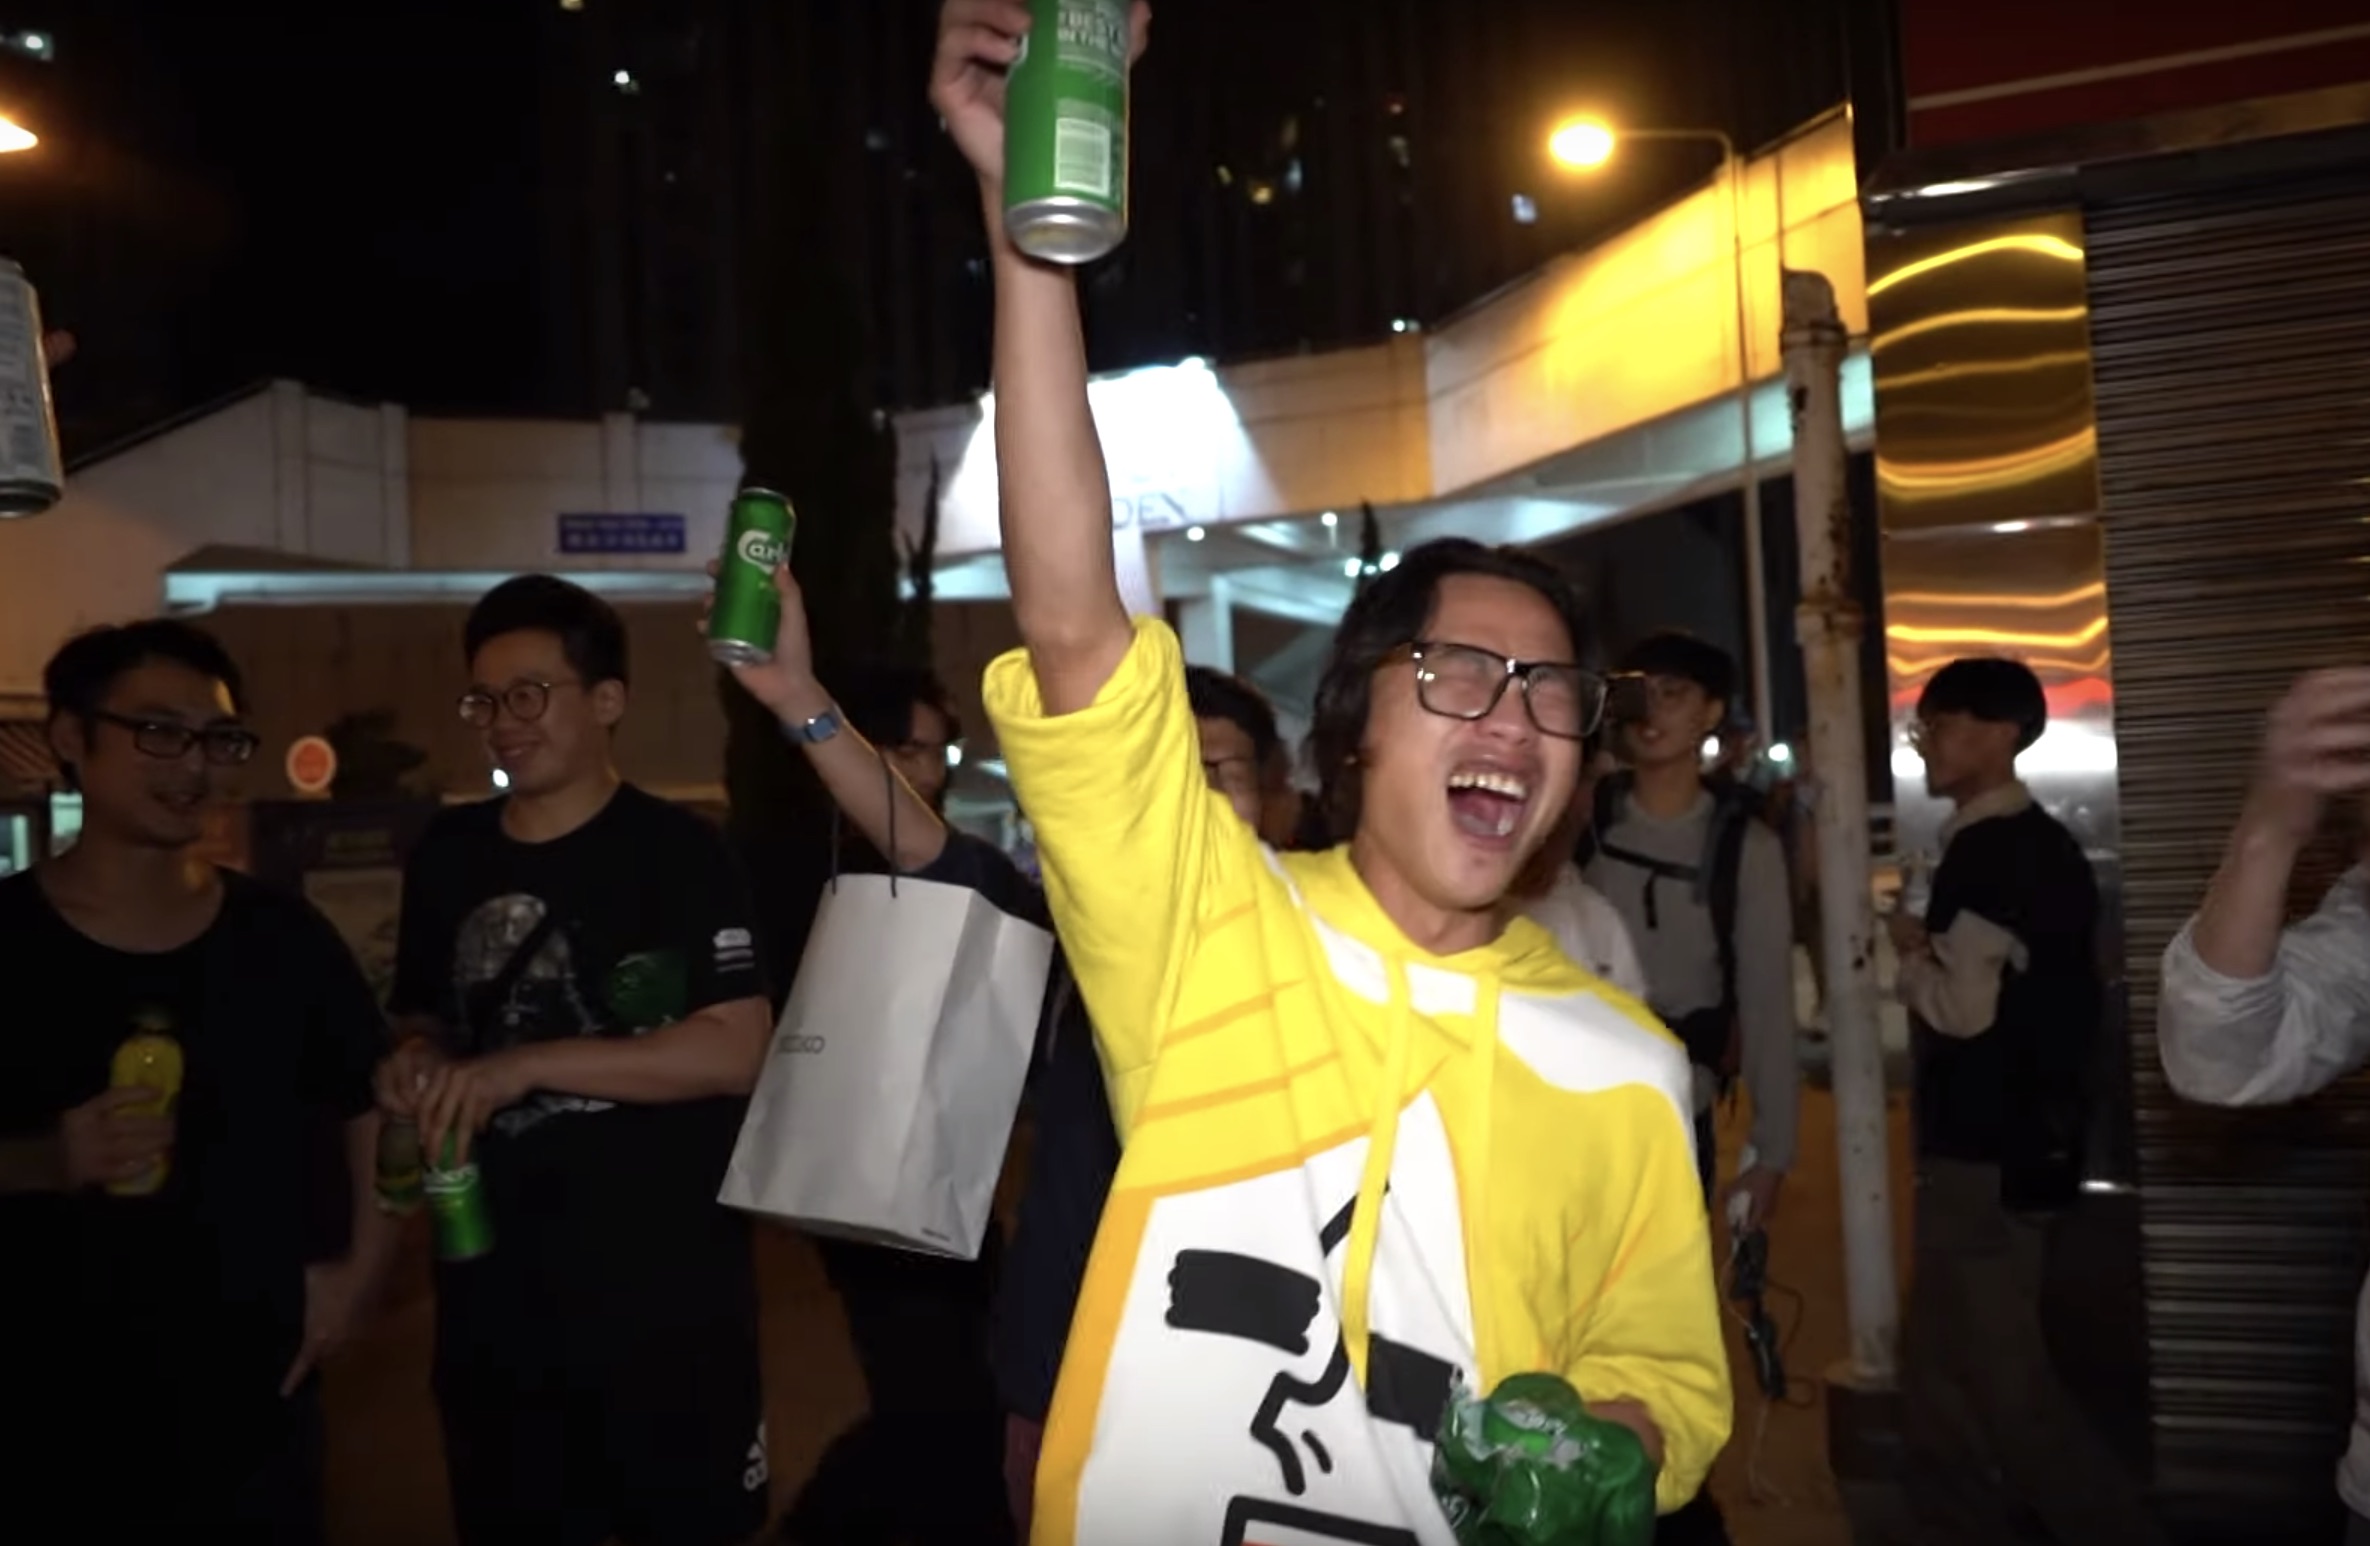 A man raises a beer with others in Tuen Mun after controversial politician Junius Ho loses his district council re-election bid last night. Screengrab via YouTube.